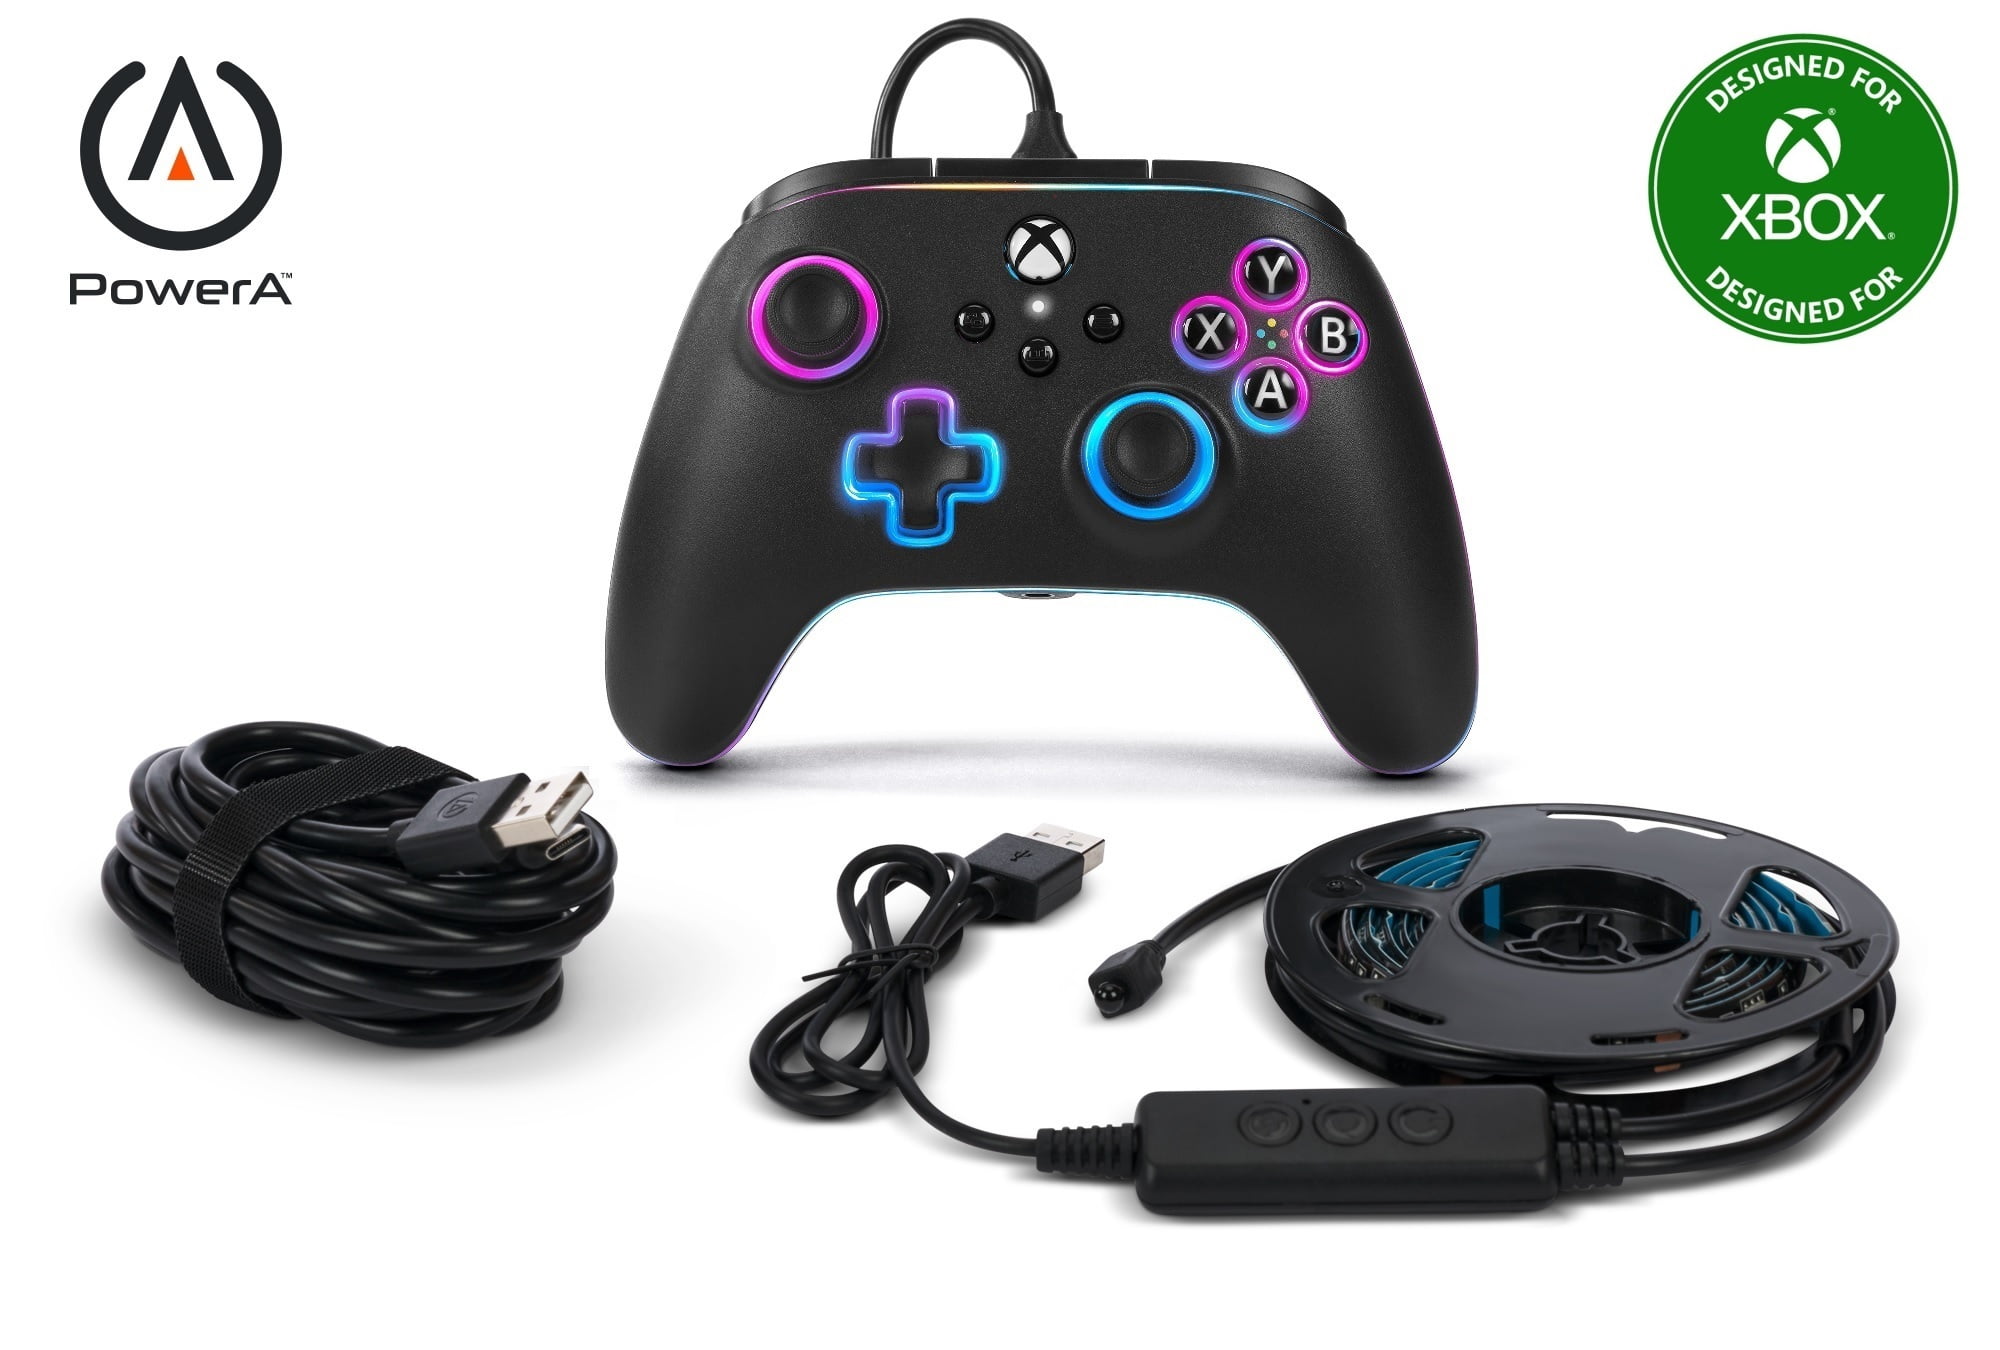 Powera Advantage Wired Controller for Xbox Series X|S with Lumectra + RGB LED Strip - Black